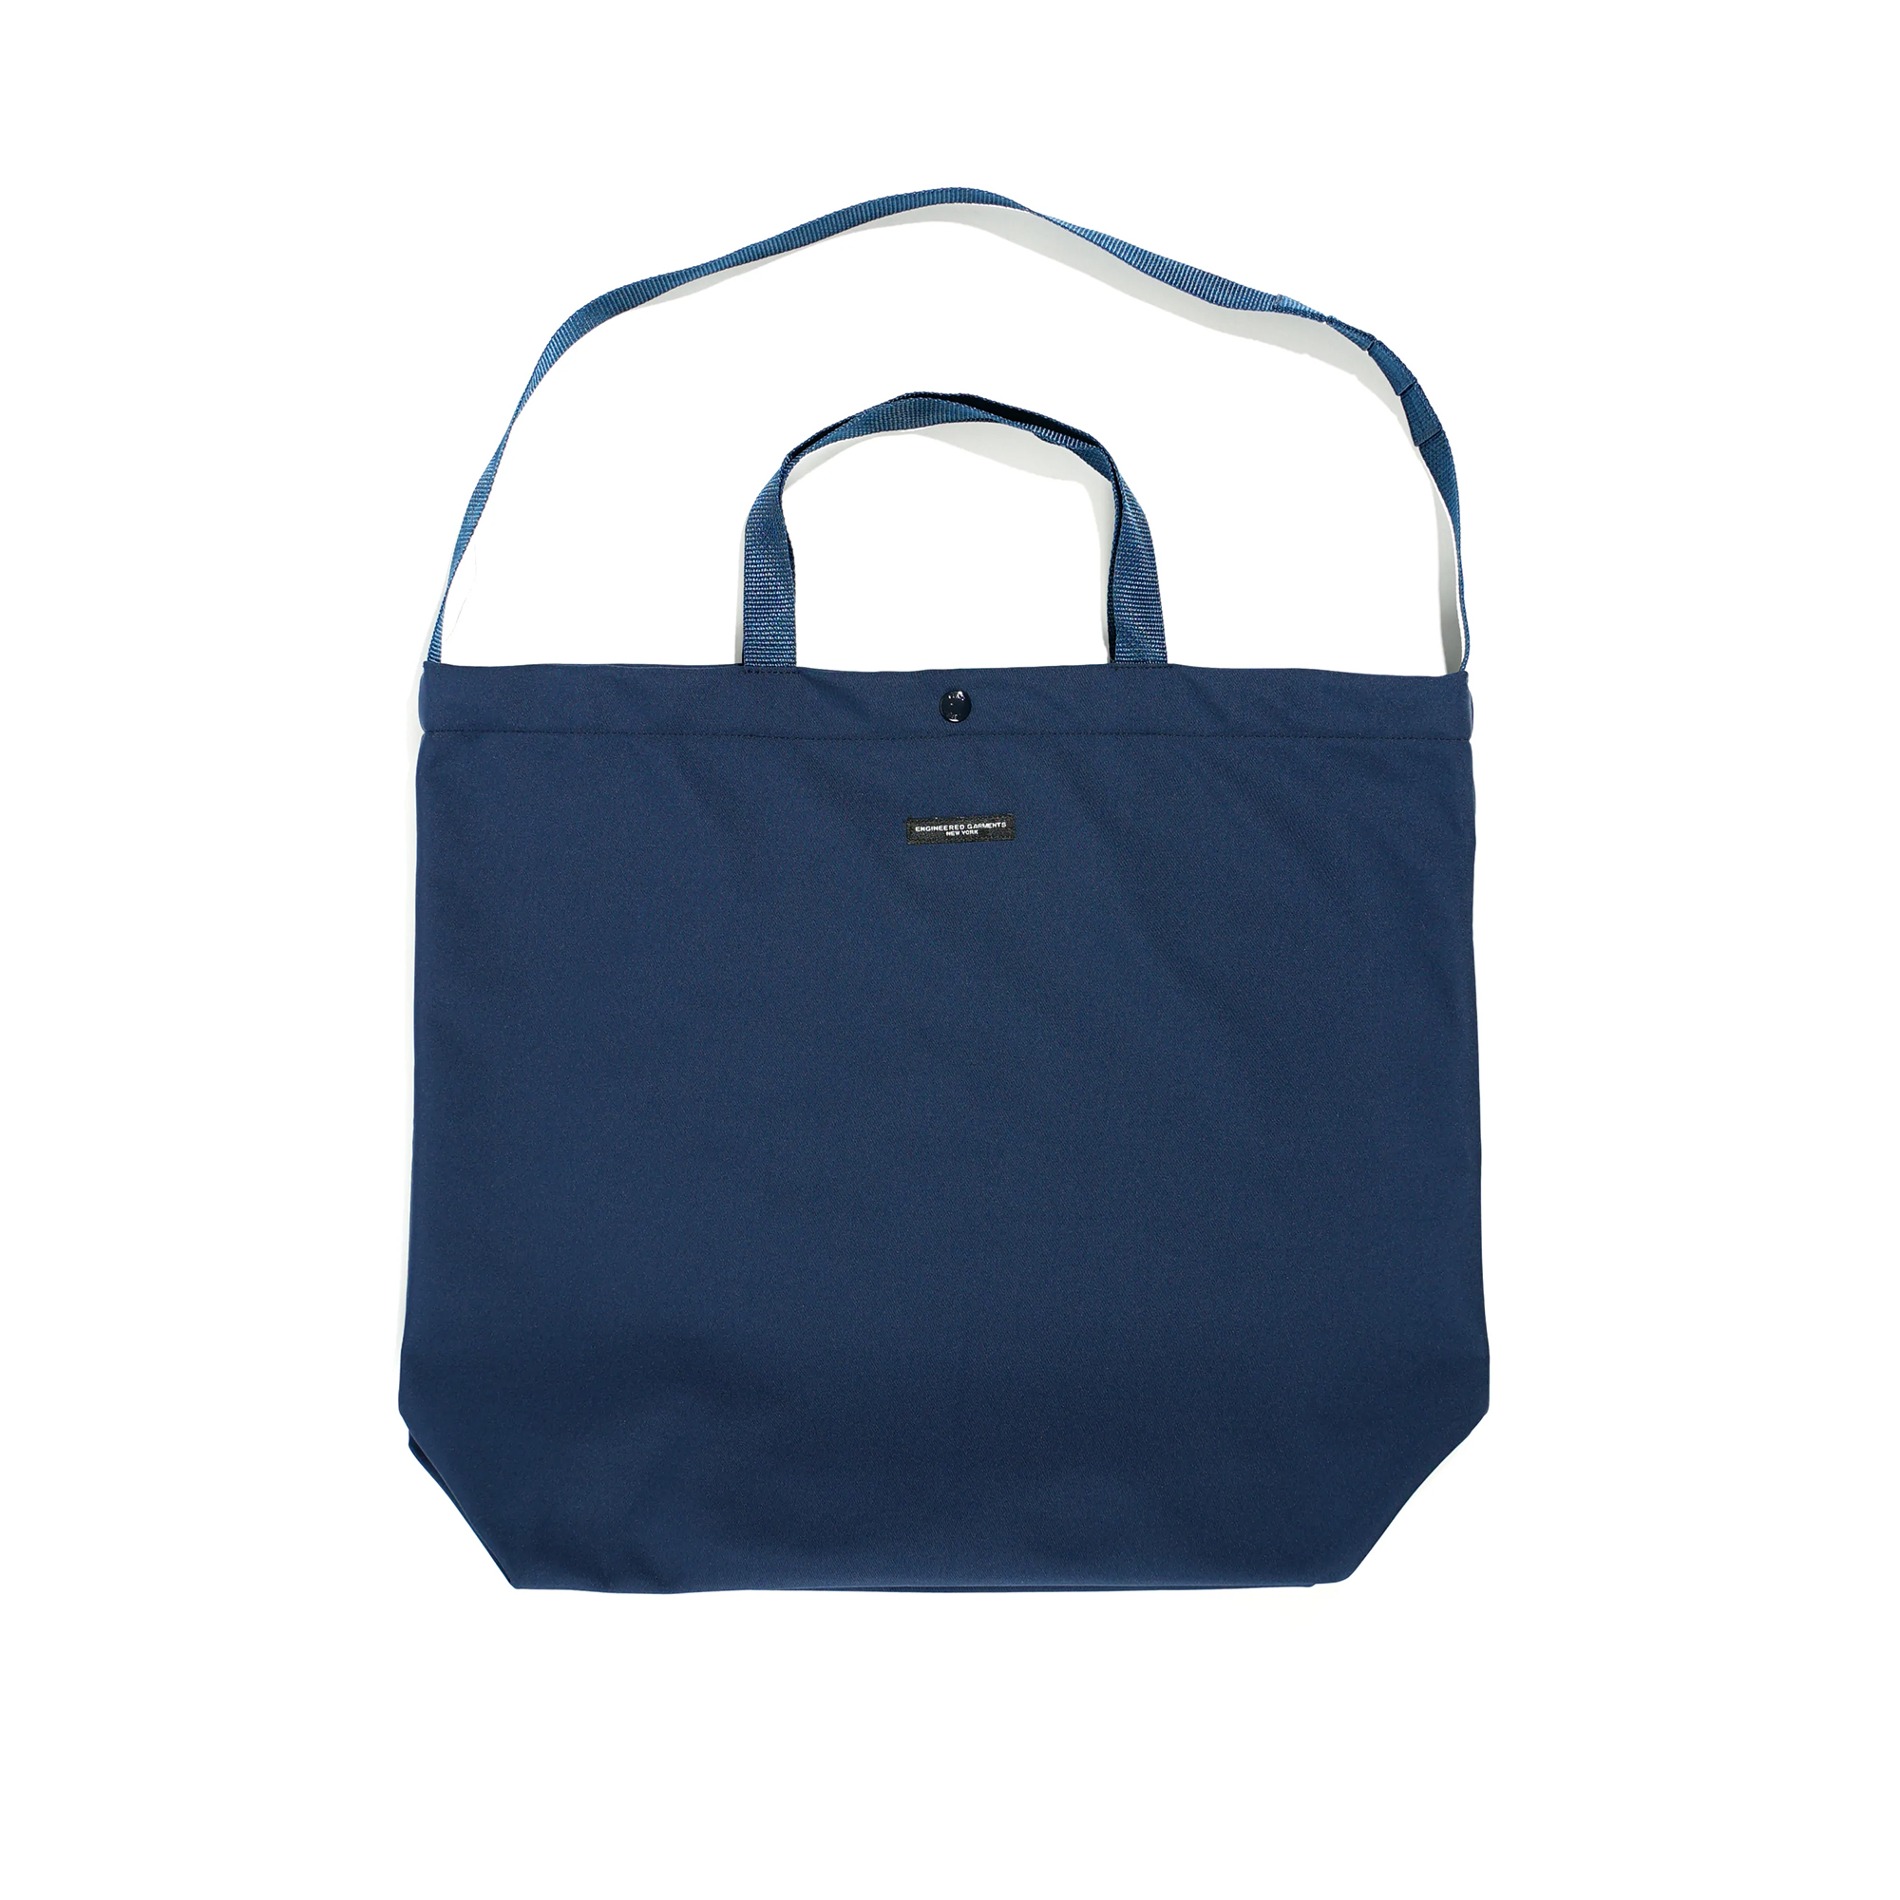 FCRB 23SS SMALL TOTE BAG 新品　ブリストル トートバッグ